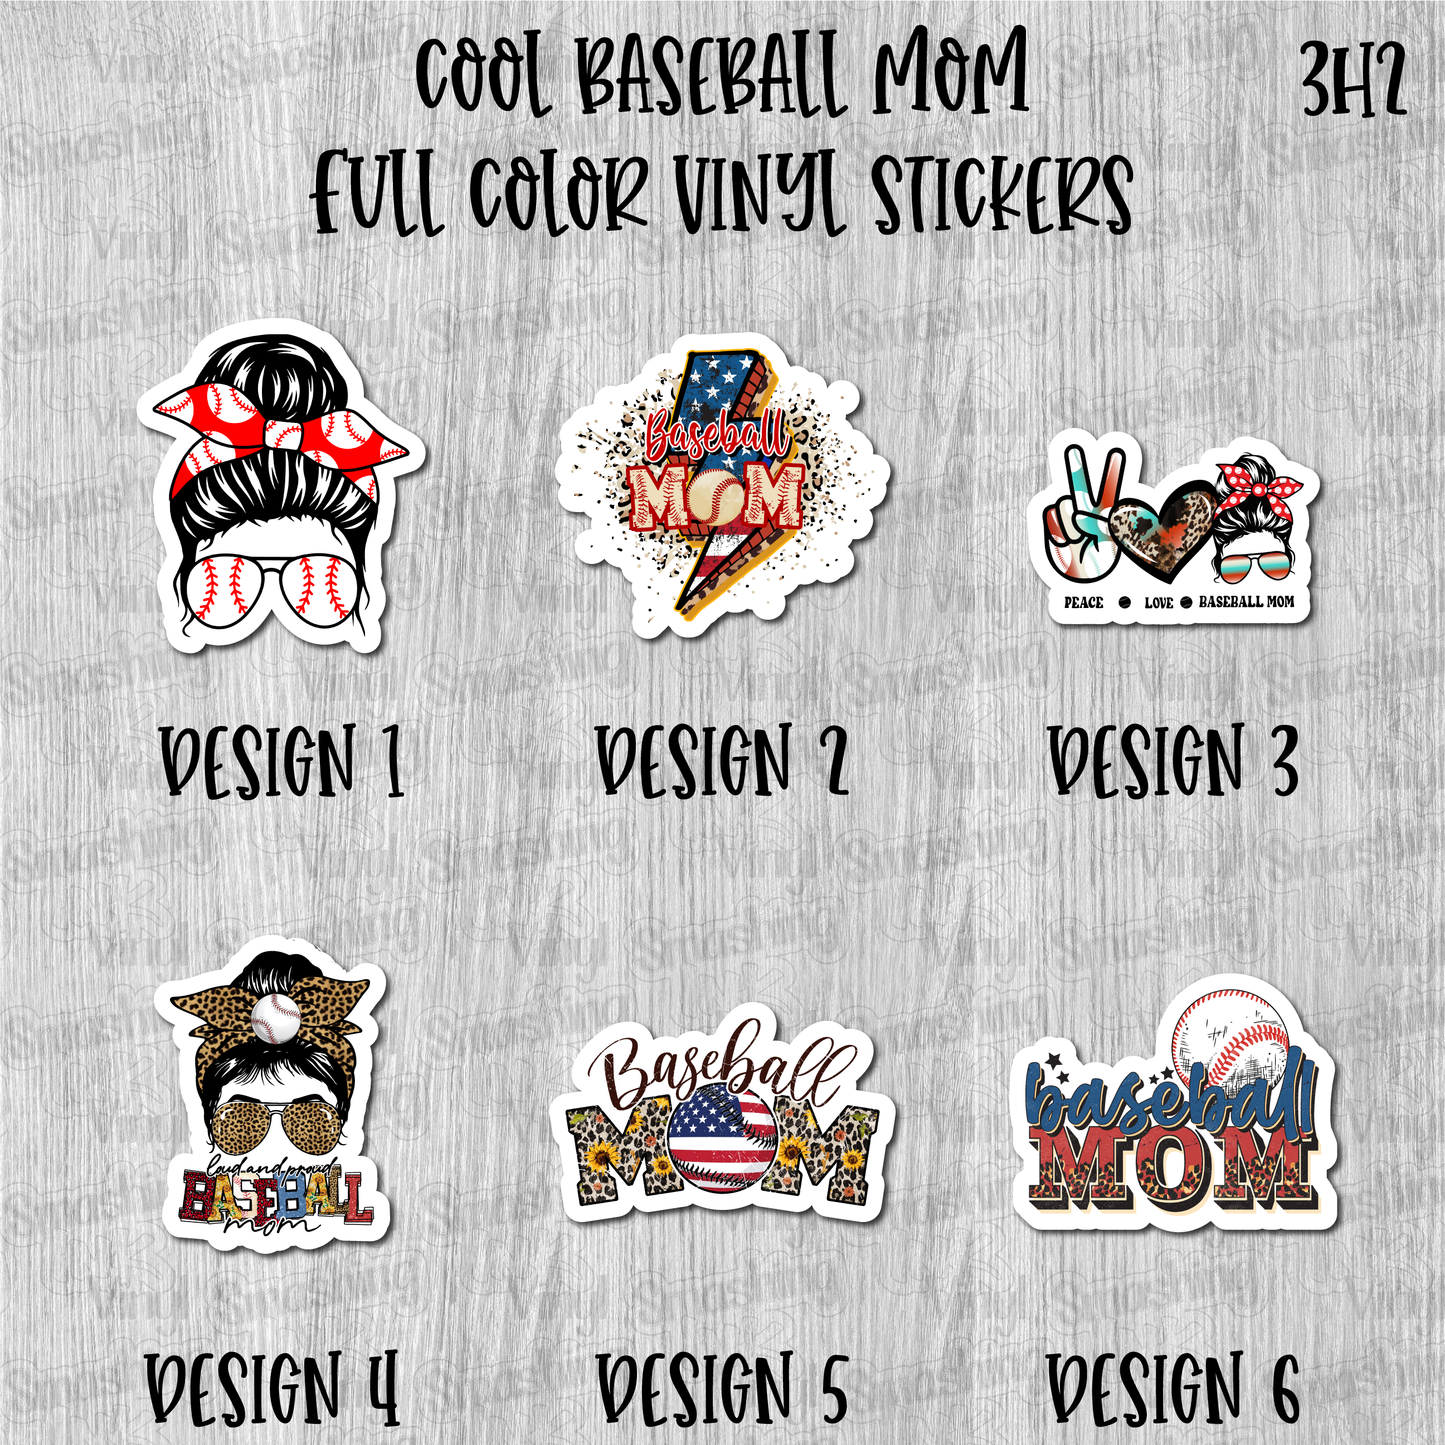 Cool Baseball Mom - Full Color Vinyl Stickers (SHIPS IN 3-7 BUS DAYS)